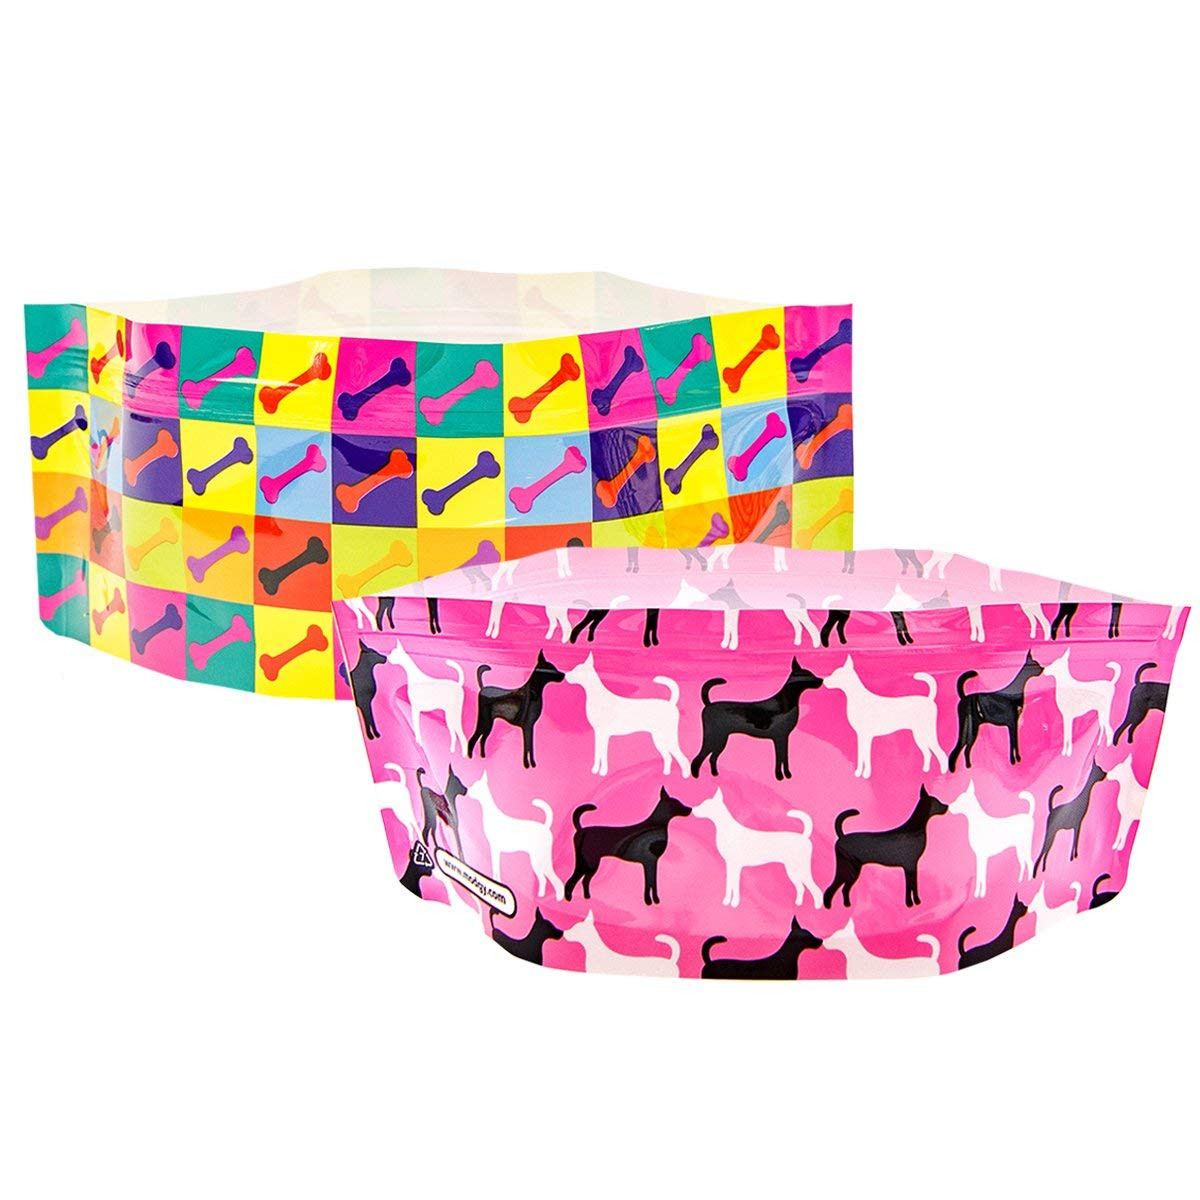 21 Popular Modgy Expandable Vase 2024 free download modgy expandable vase of amazon com modgy doggy dog bowls pet supplies within 71r7r5i191l sl1200